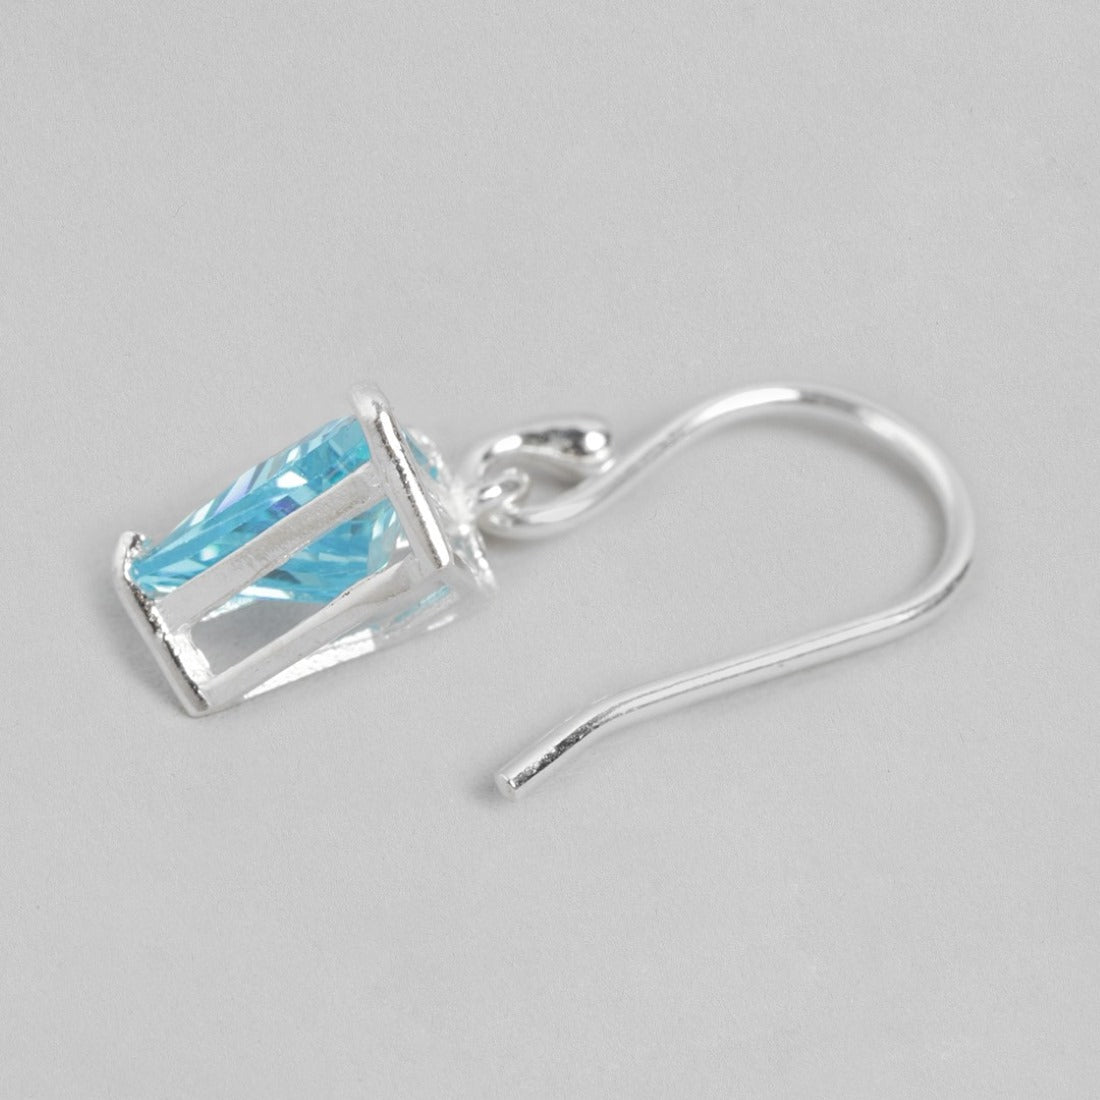 Sky's Serenity Rhodium Plated Blue CZ 925 Sterling Silver Triangle Earrings